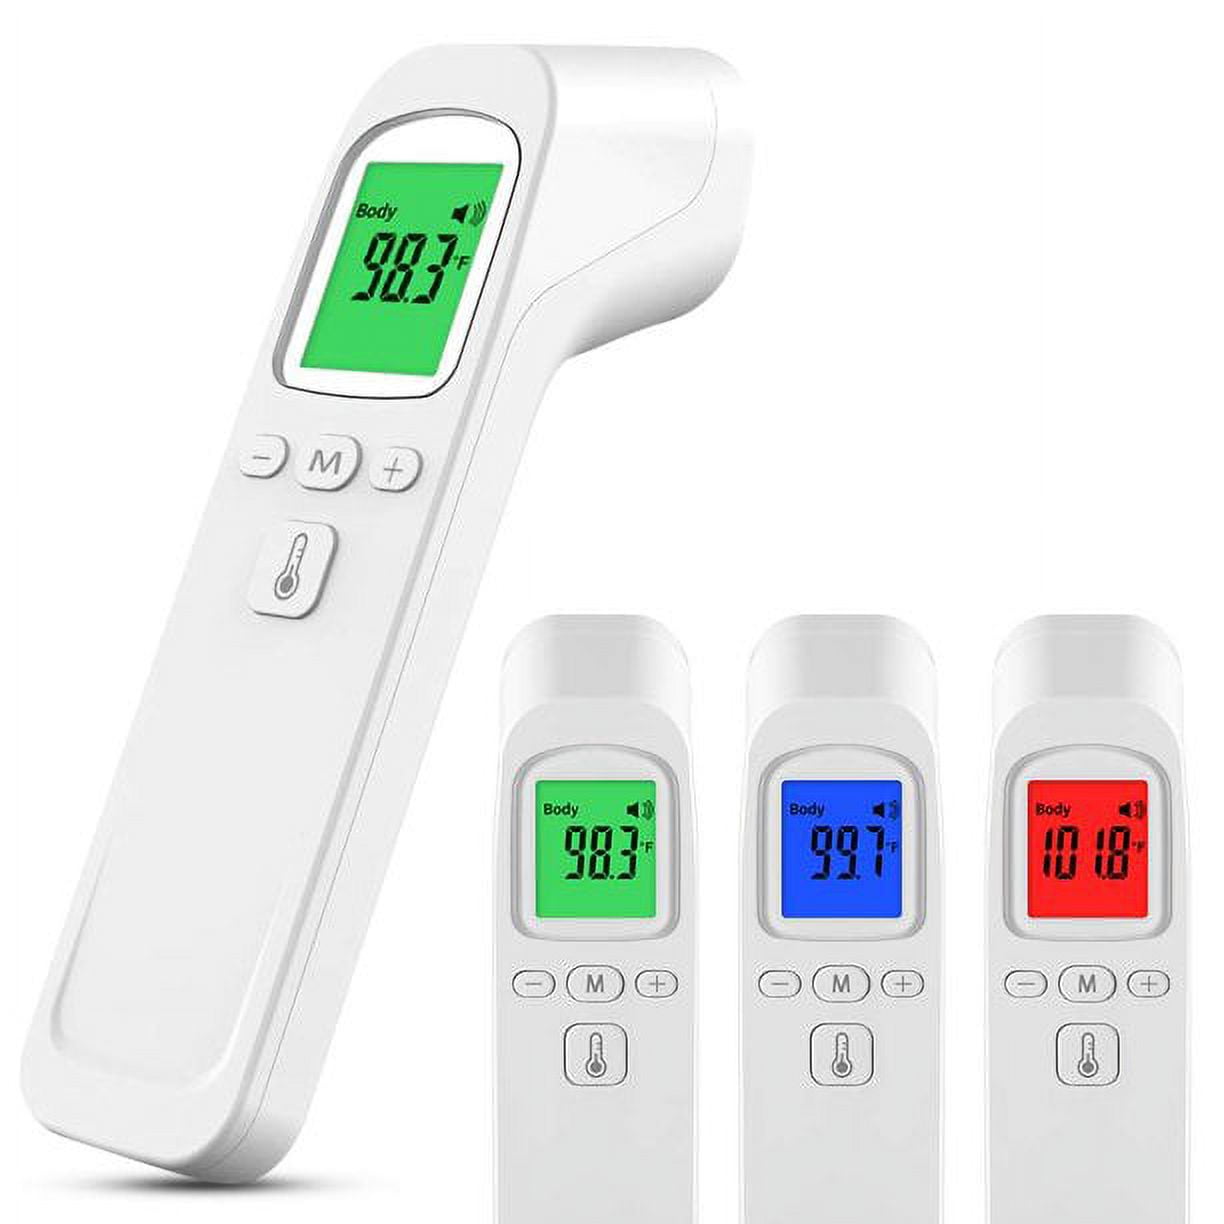 Digital Fever Thermometer - Health, Safety & Travel - Products wholesale  baby product manufacturer